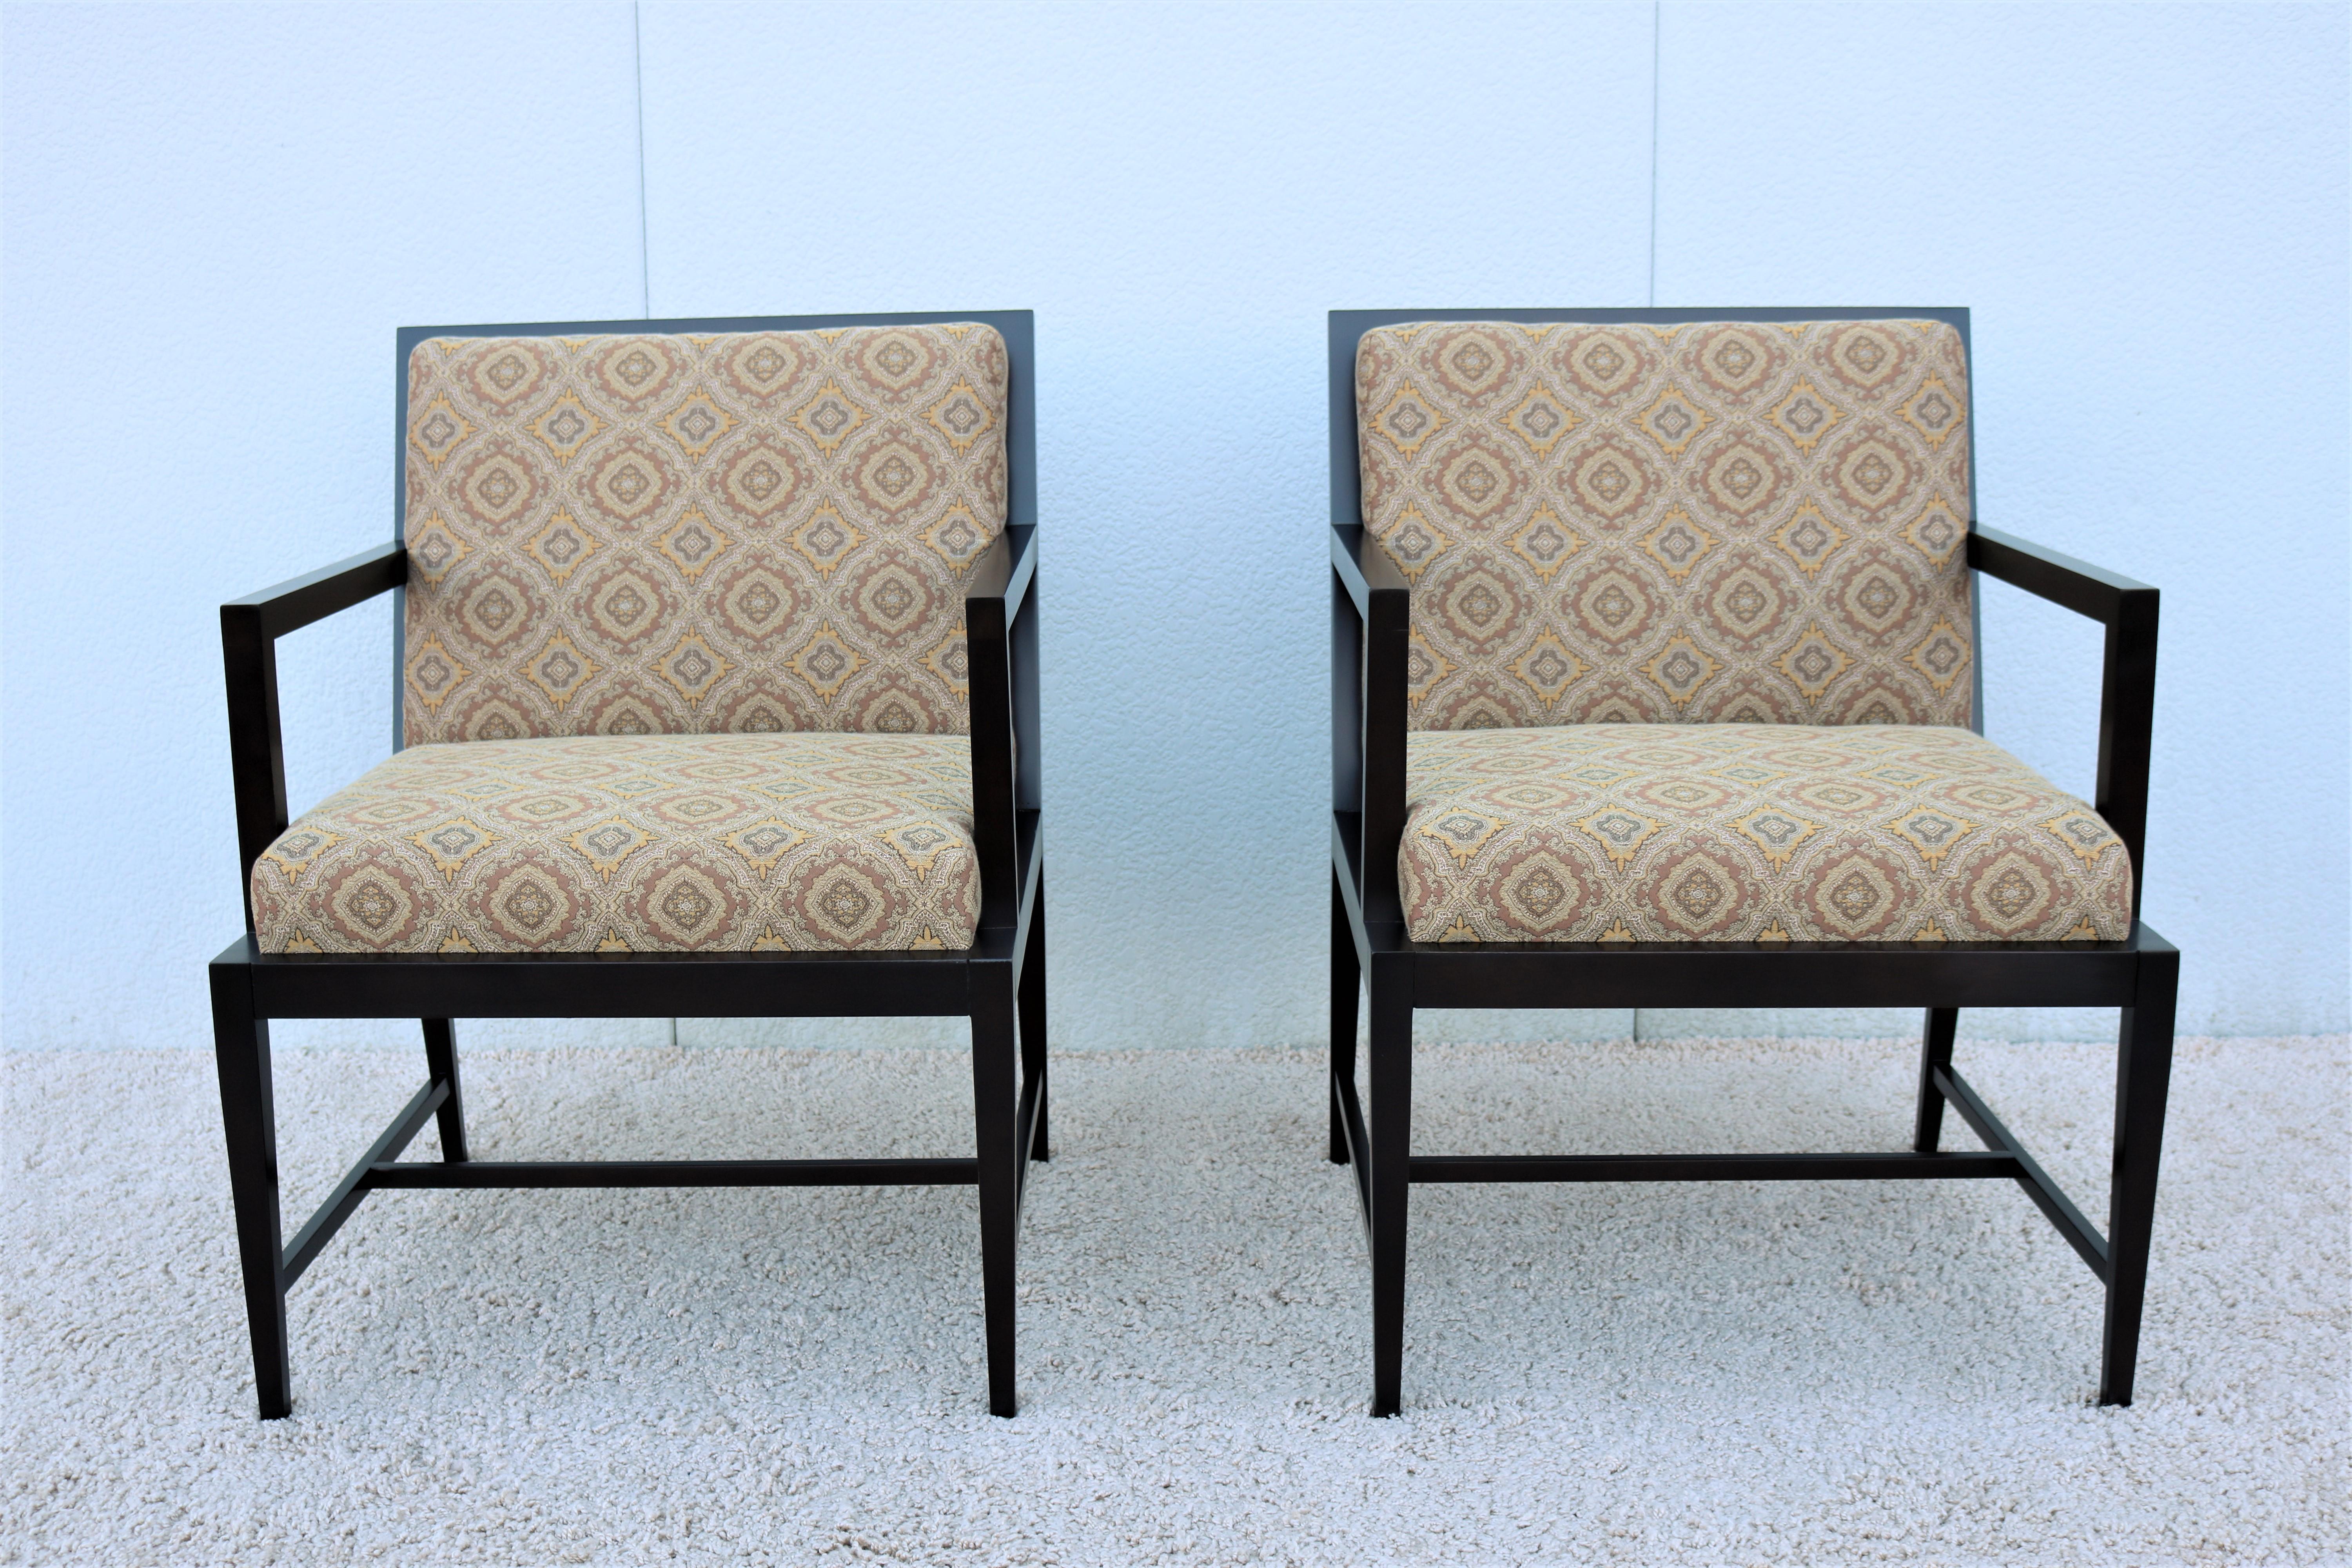 Beautiful pair of guest or dining armchairs, well-constructed with high-end quality material.
The contemporary modern design makes these chairs great for home or office use.
Please note these chairs are discontinued model HBF do not manufacture